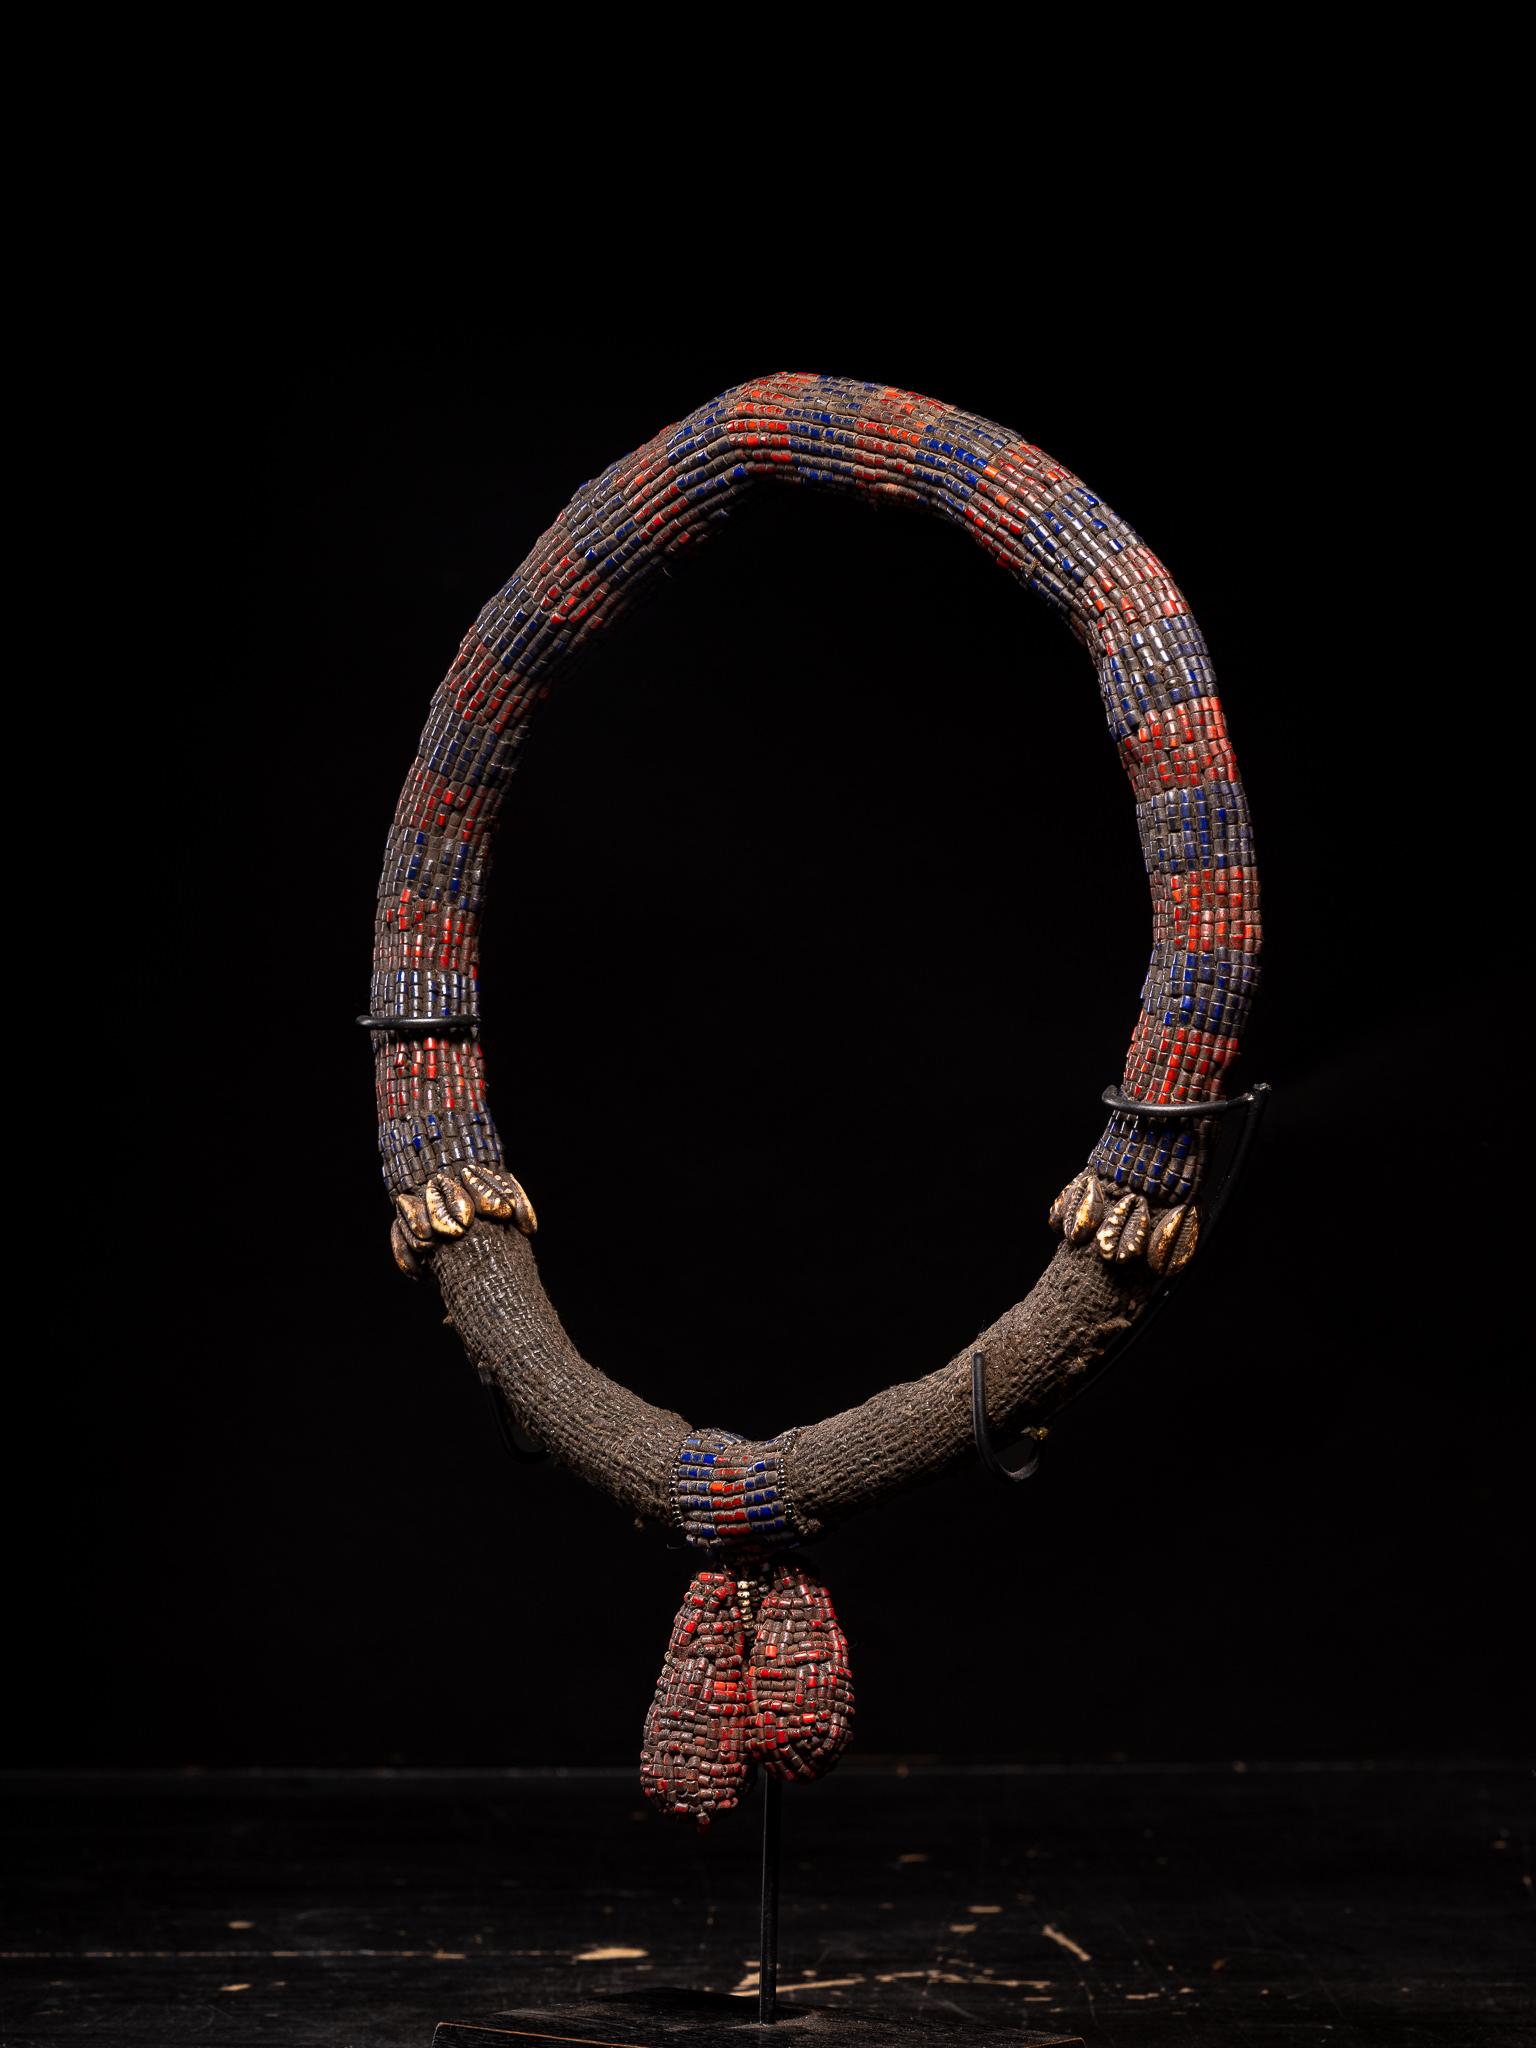 Bamileke beaded Collar or Torque, Cameroon 

Private collection Brussels

